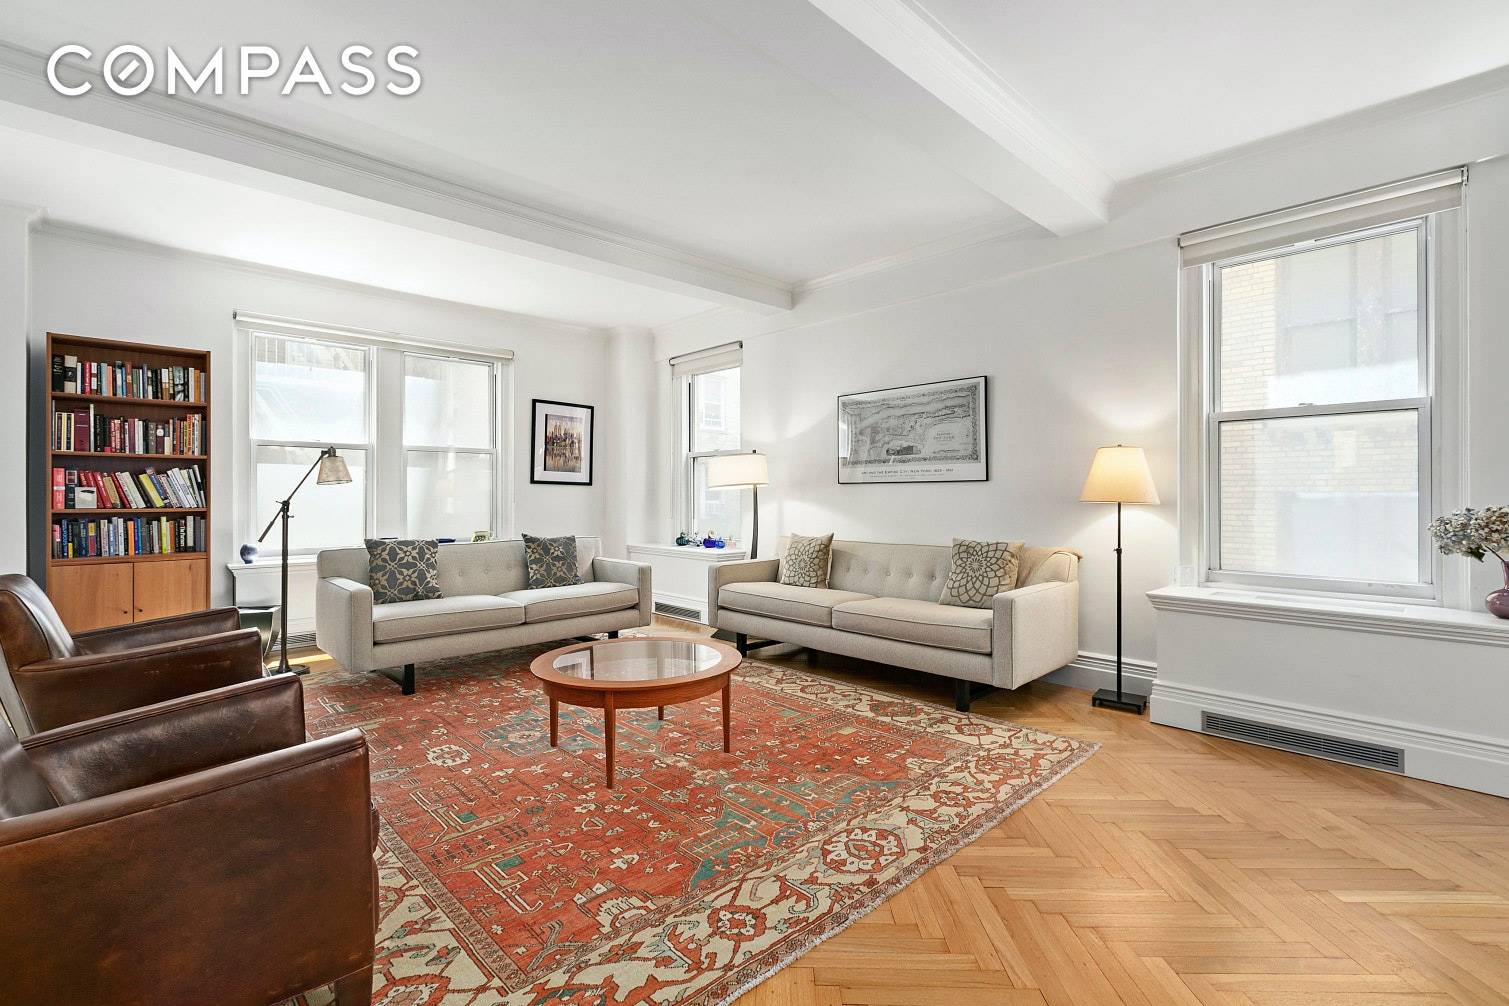 An exceptional and renovated 2 bedroom 2 bathroom home at 15 West 81st Street, the famed Emery Roth landmark building and one of the top coops in New York.